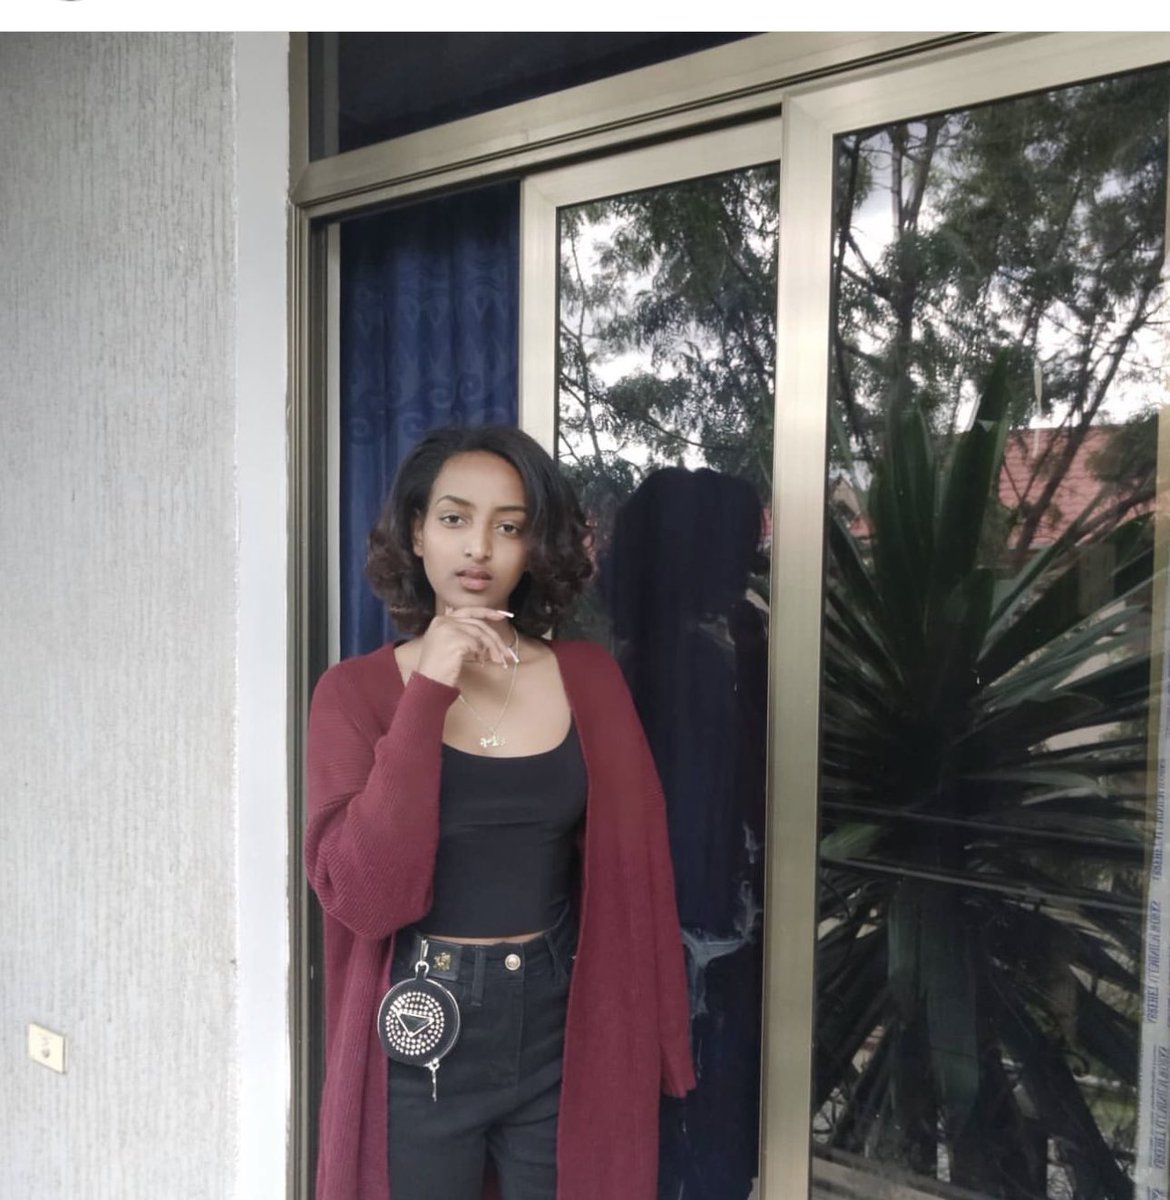 I’m avictim of the war on #Tigray my right arm is amputated and my right side hip bone is broken in multiple parts. I get this problem cause I said no for rape! My message for the GBV victims don’t be ashamed.it’s them who should feel ashamed. #TigrayGenocide